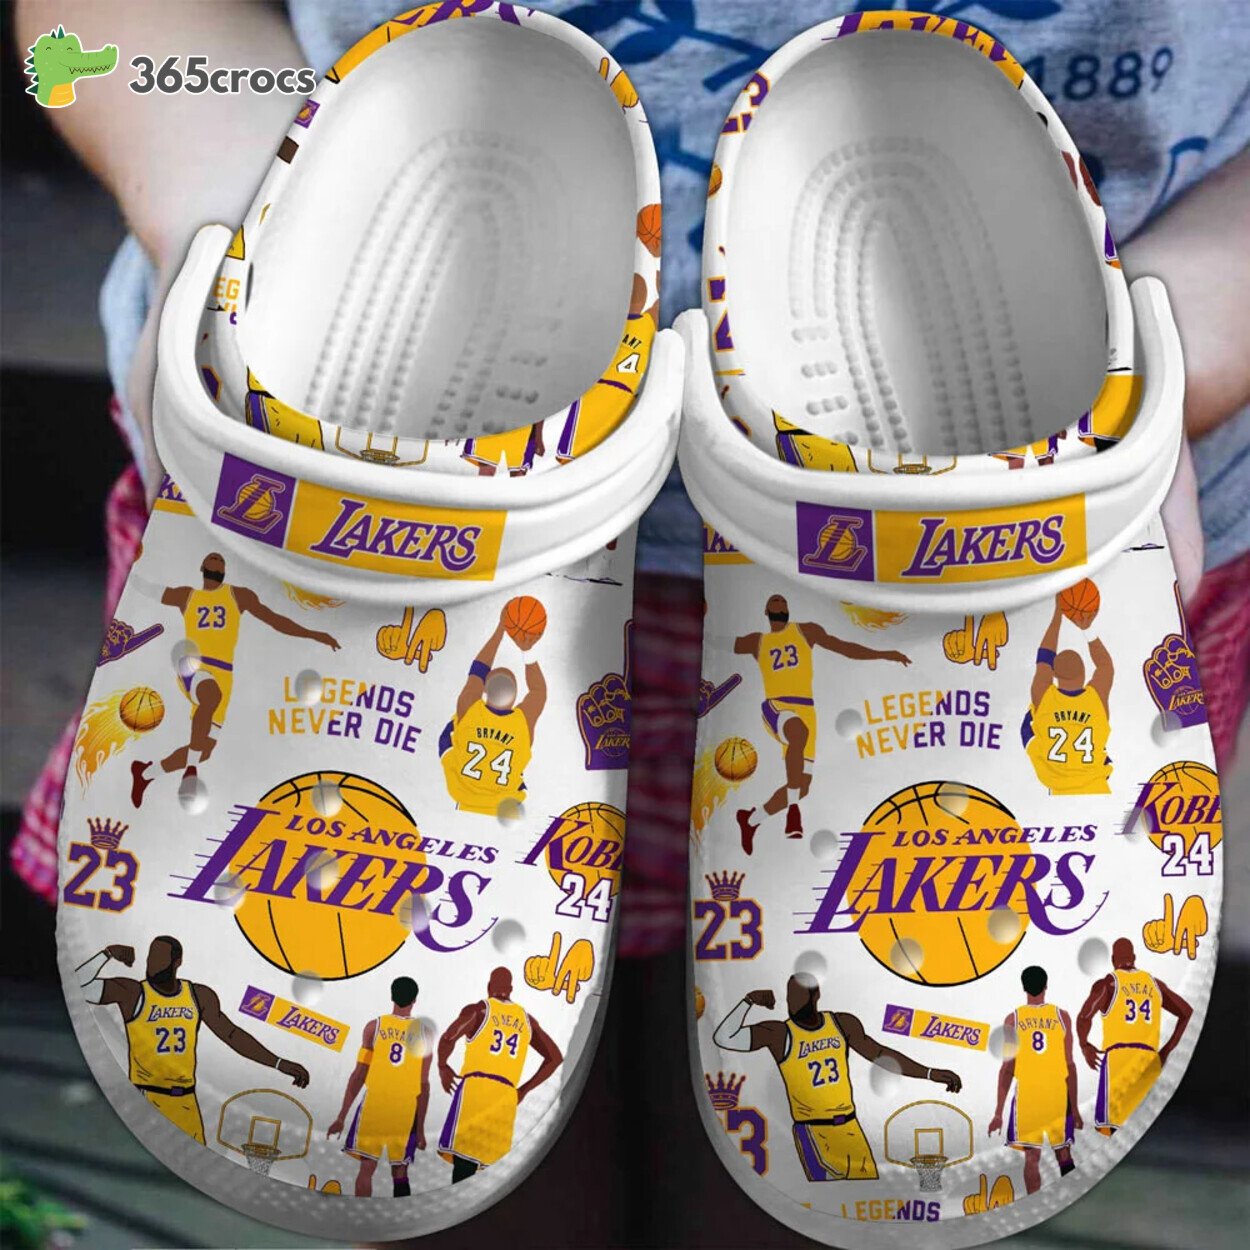 Los Angeles Lakers Basketball Club Comfortable Shoes Crocss Kids